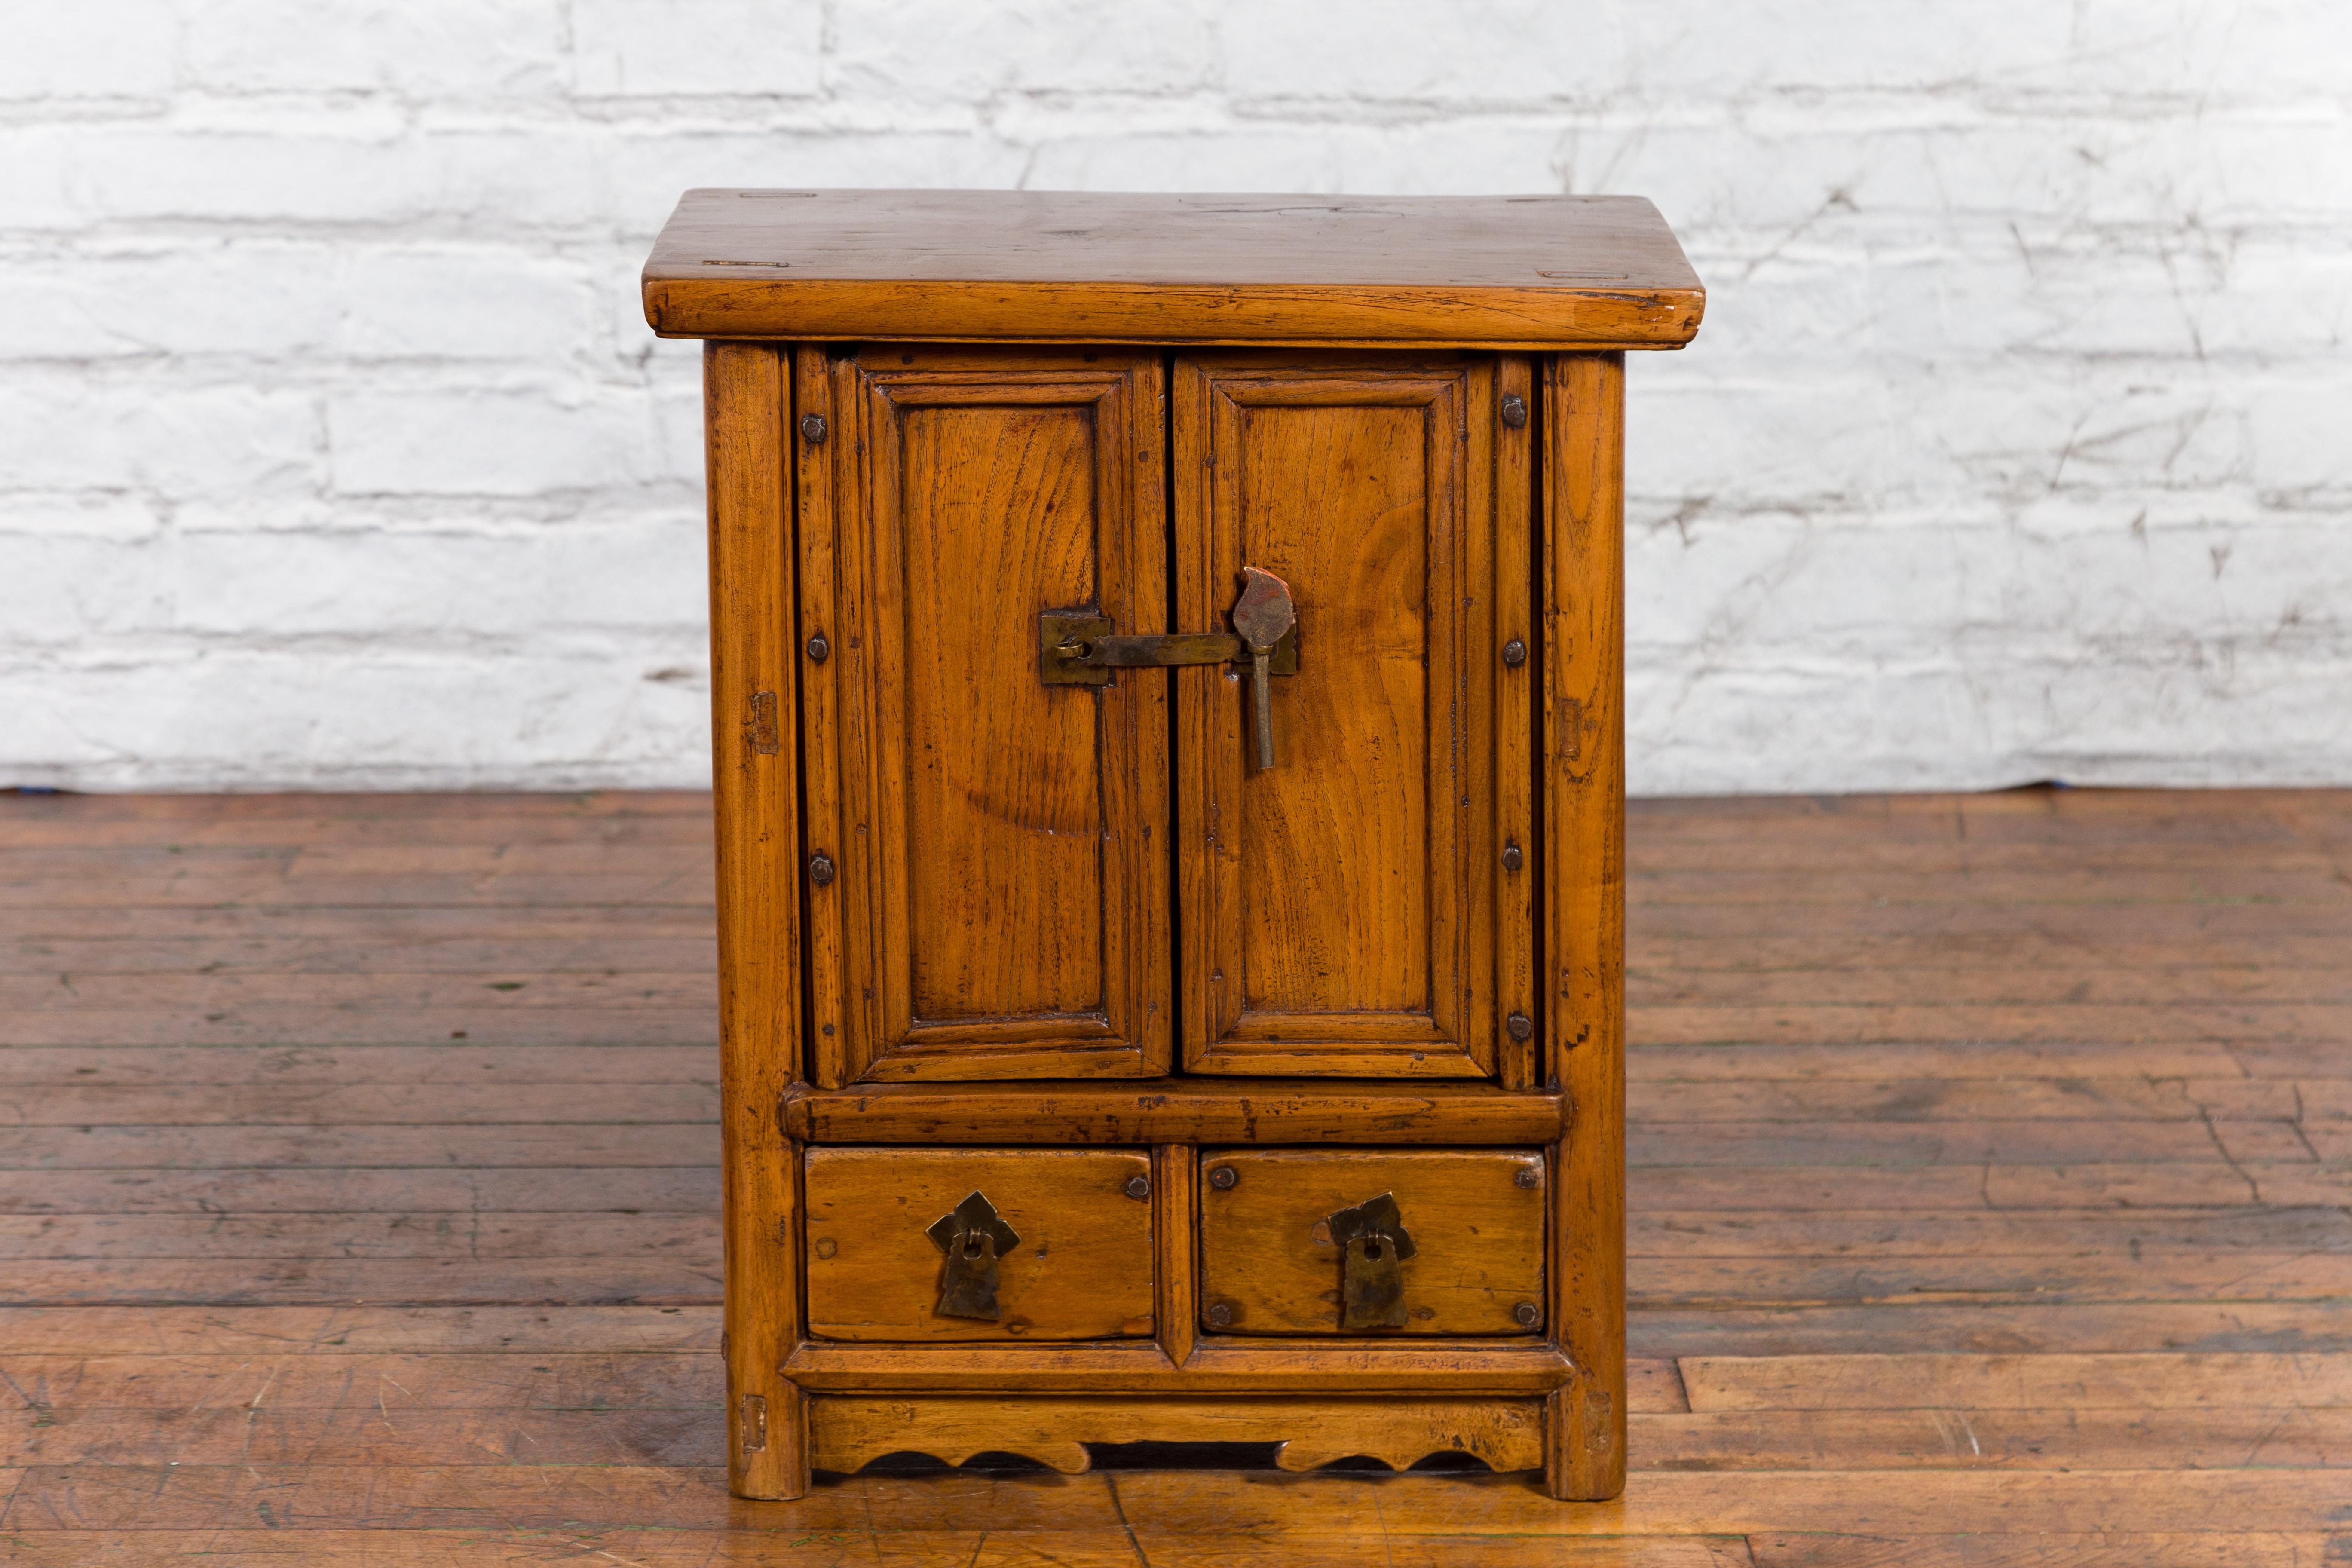 A Chinese Qing Dynasty period elmwood side cabinet from the 19th century, with double doors and two drawers. Created in China during the Qing Dynasty, this elmwood cabinet features a rectangular top sitting above two small doors fitted with a brass